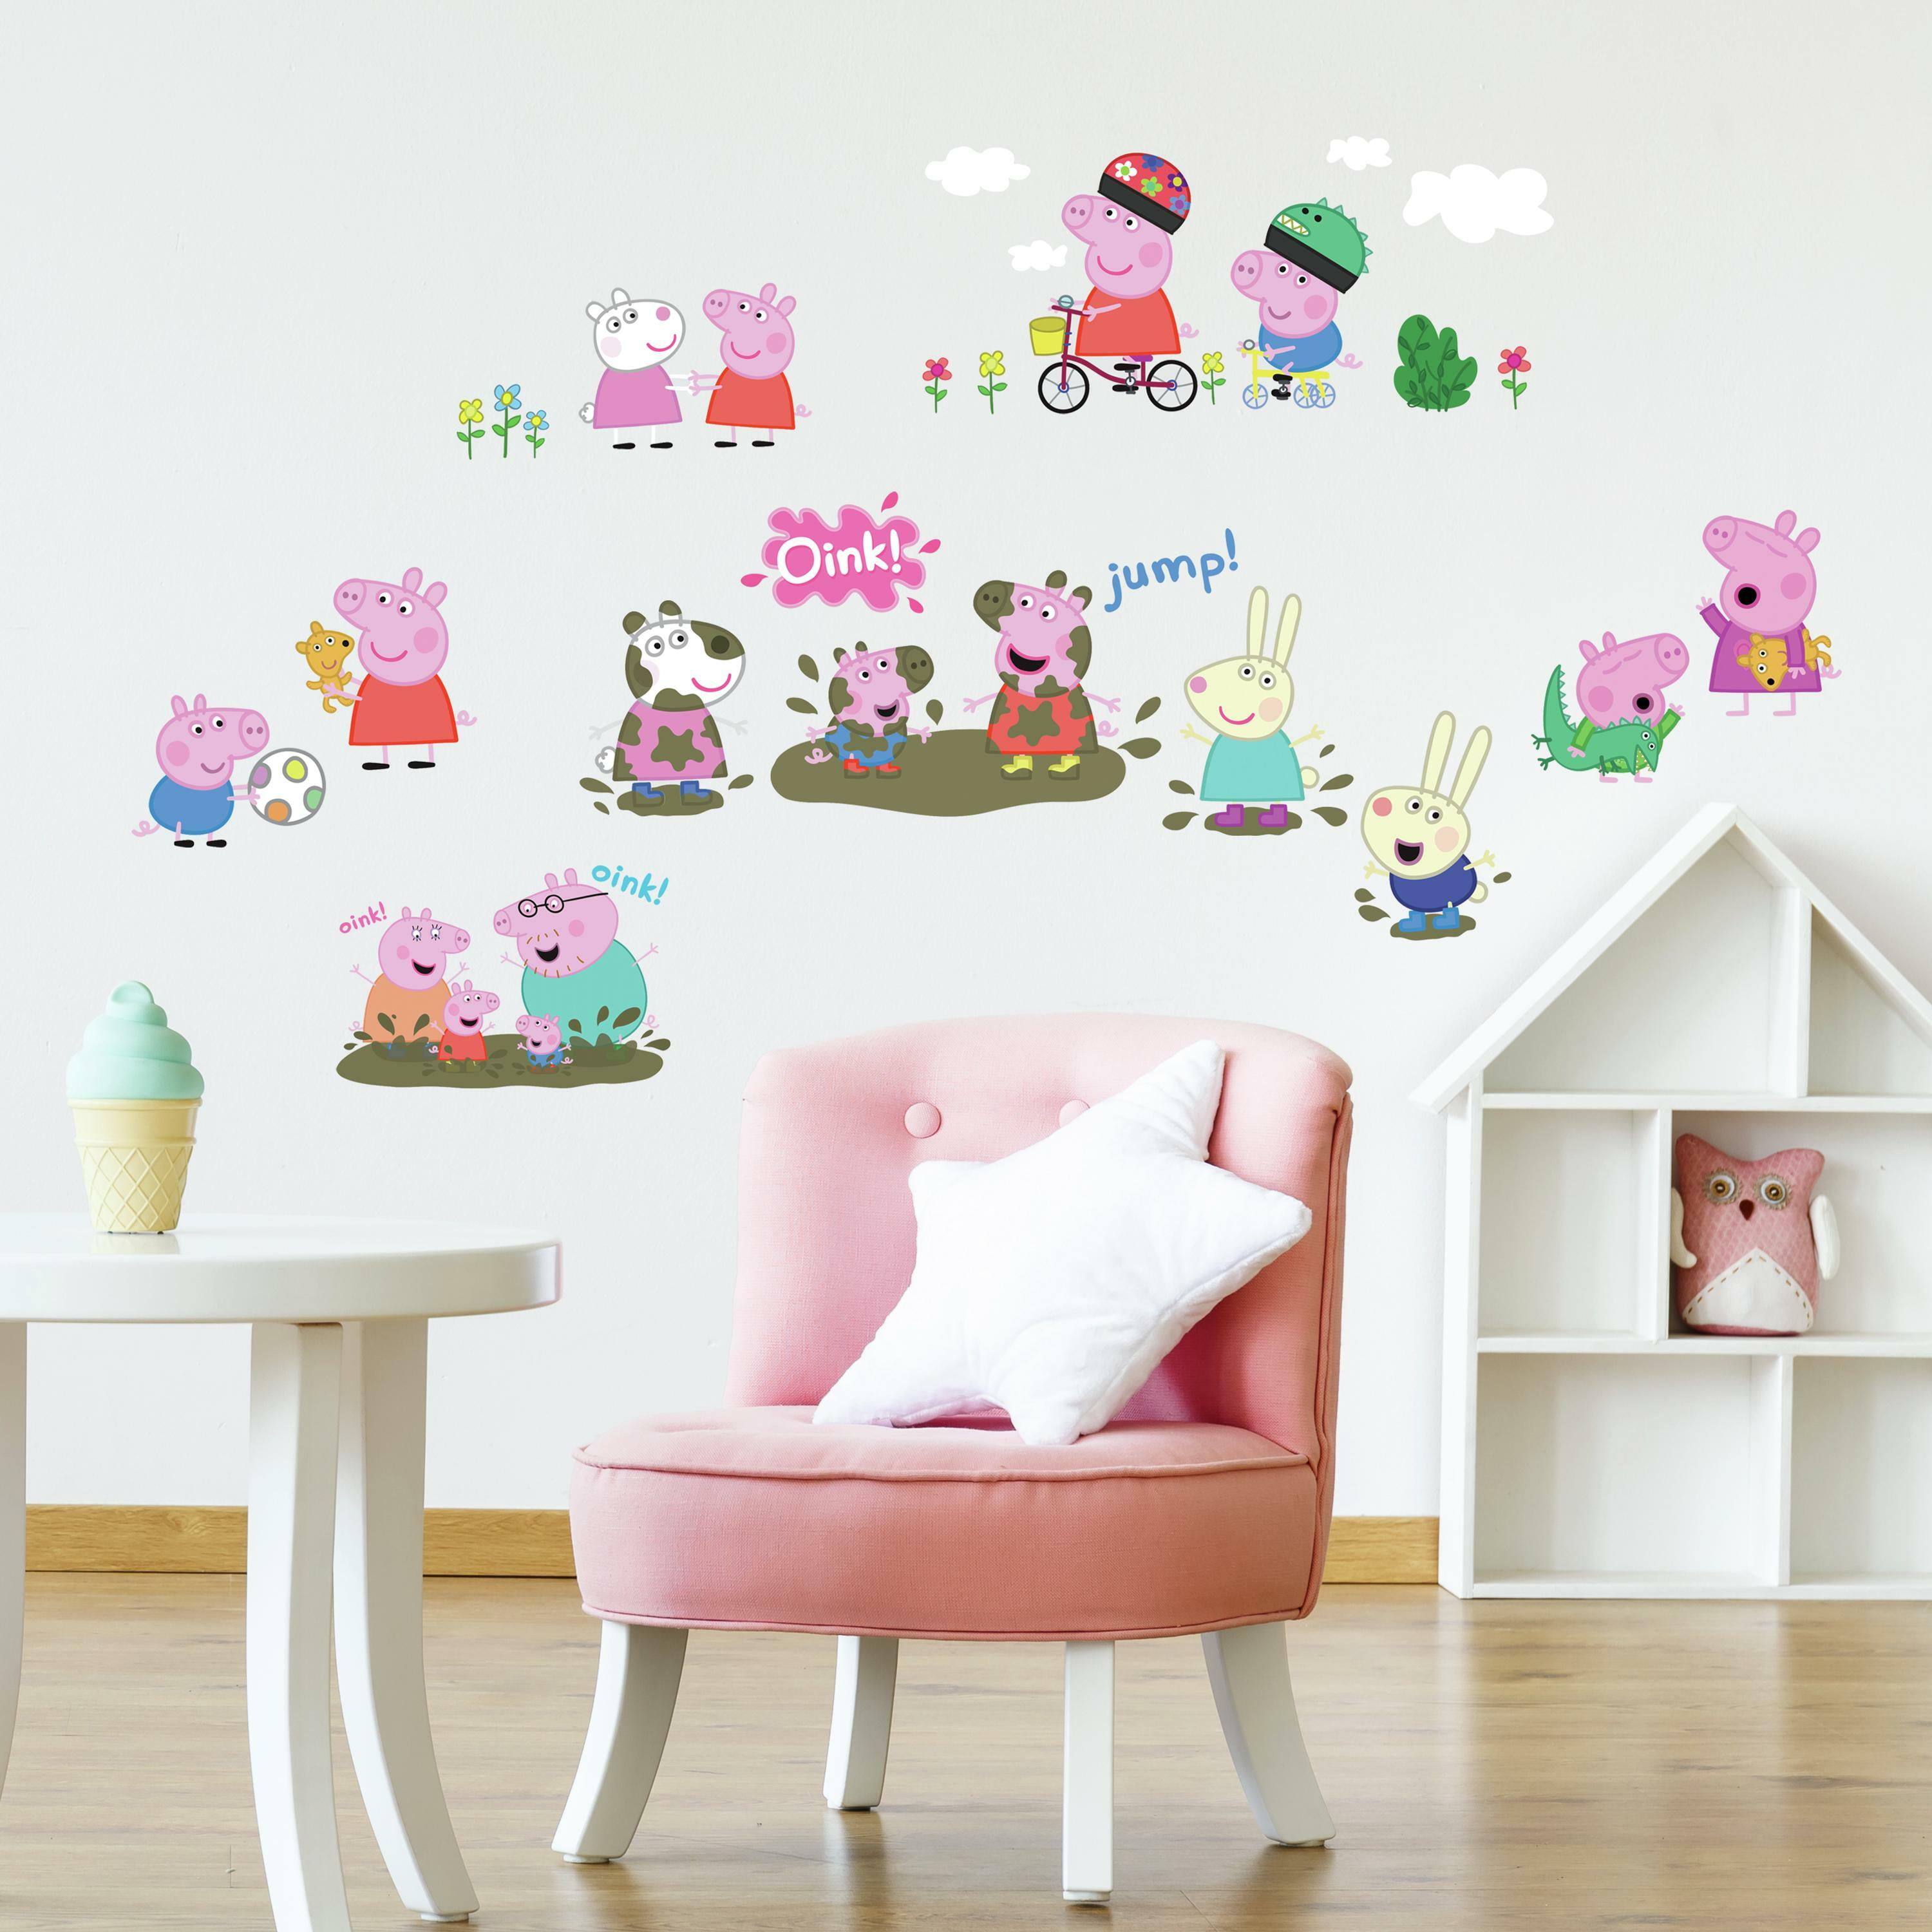 Kids Room Peppa Pig Personalized Growth Chart Wall Decal for Nursery